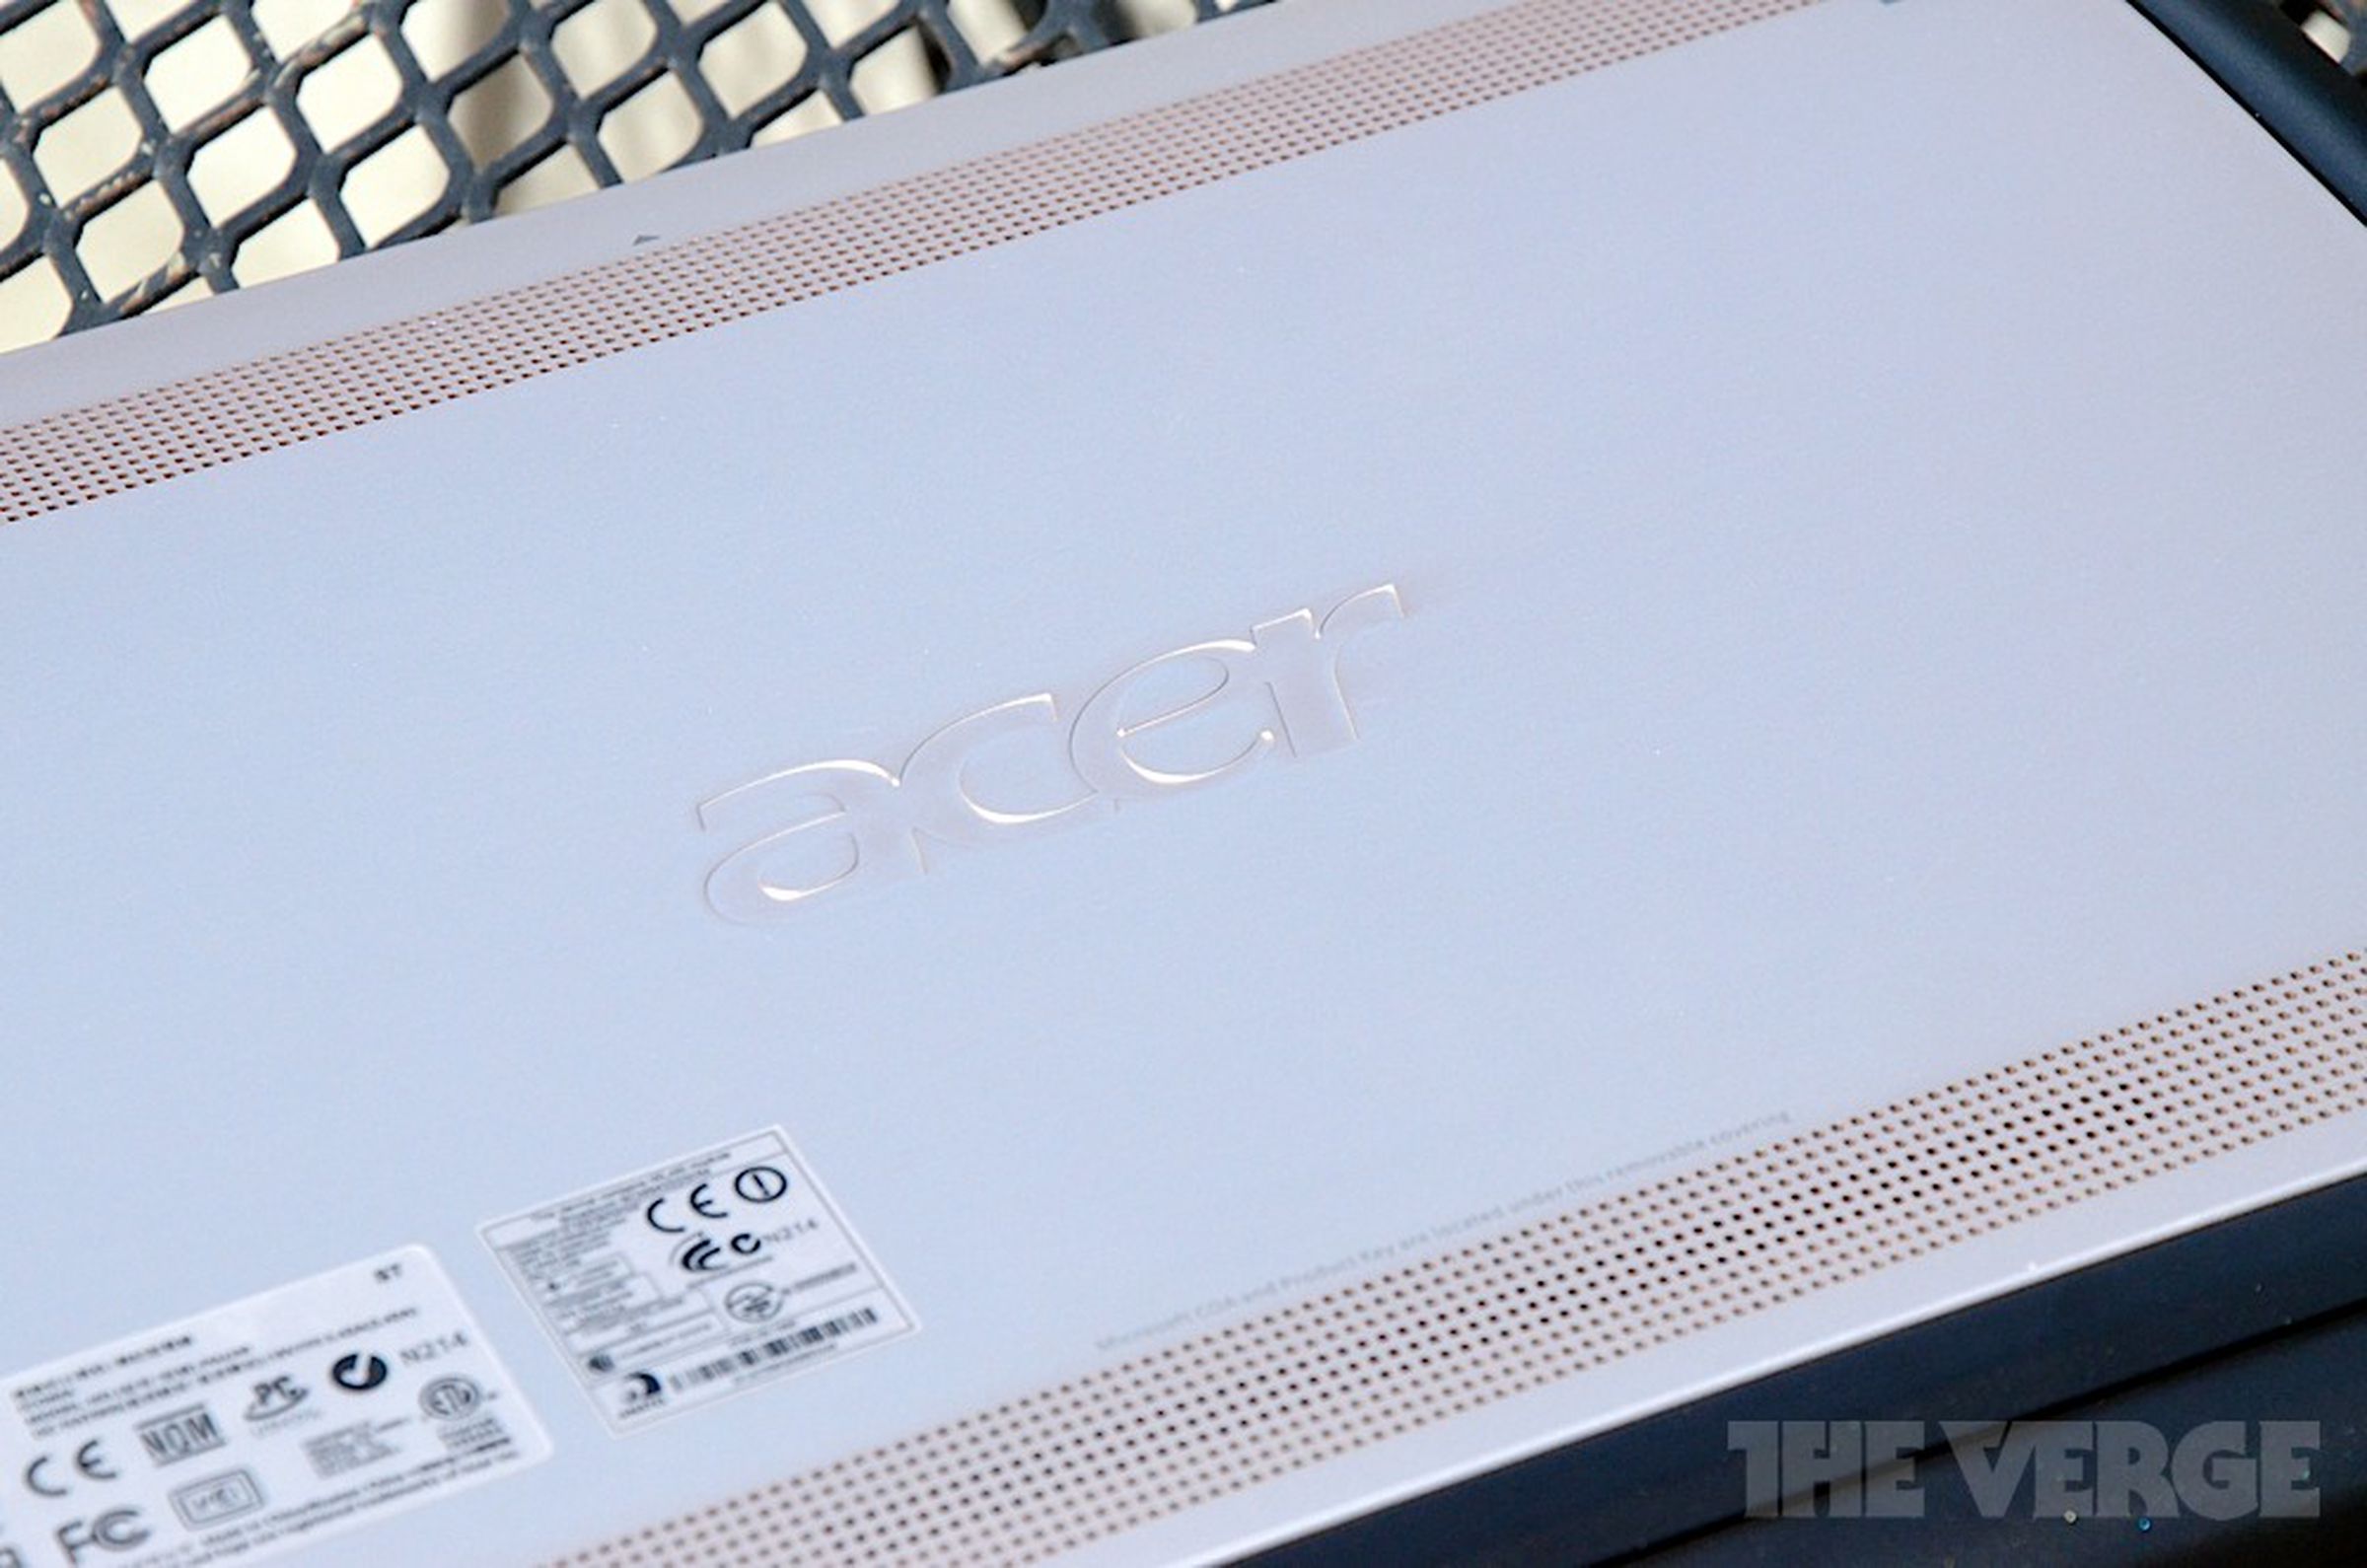 Acer Iconia 6120 Touchbook review